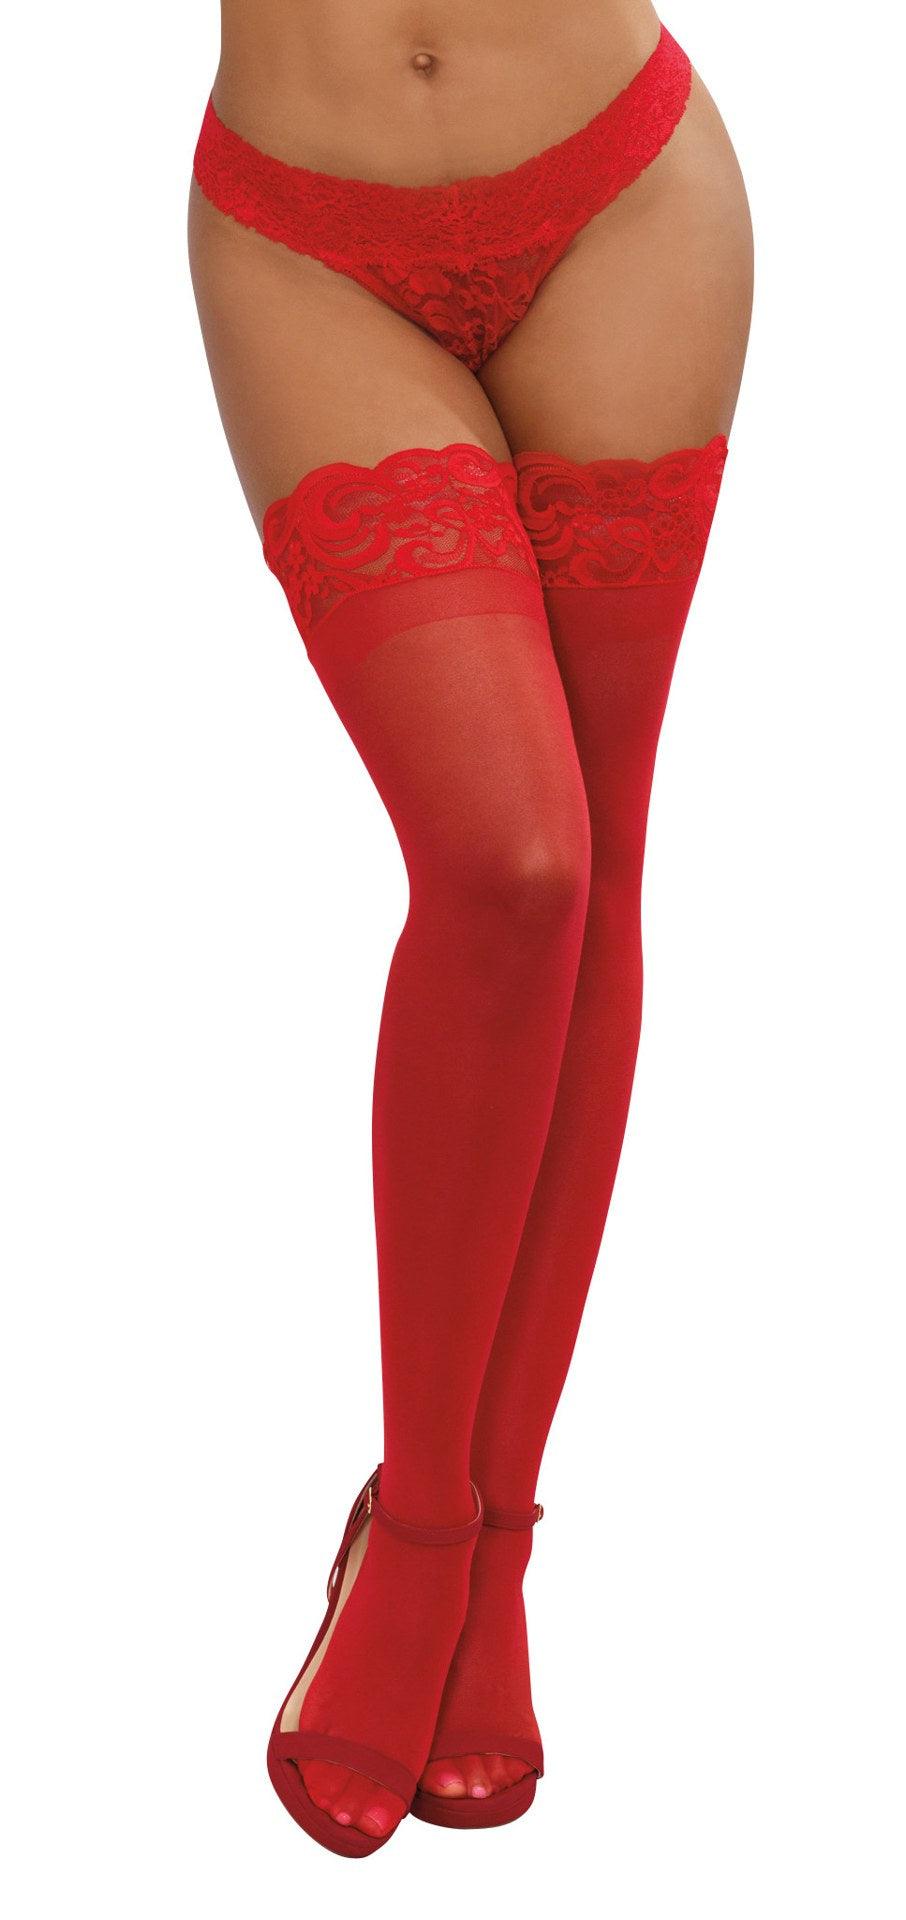 Thigh High - One Size - Red - My Sex Toy Hub